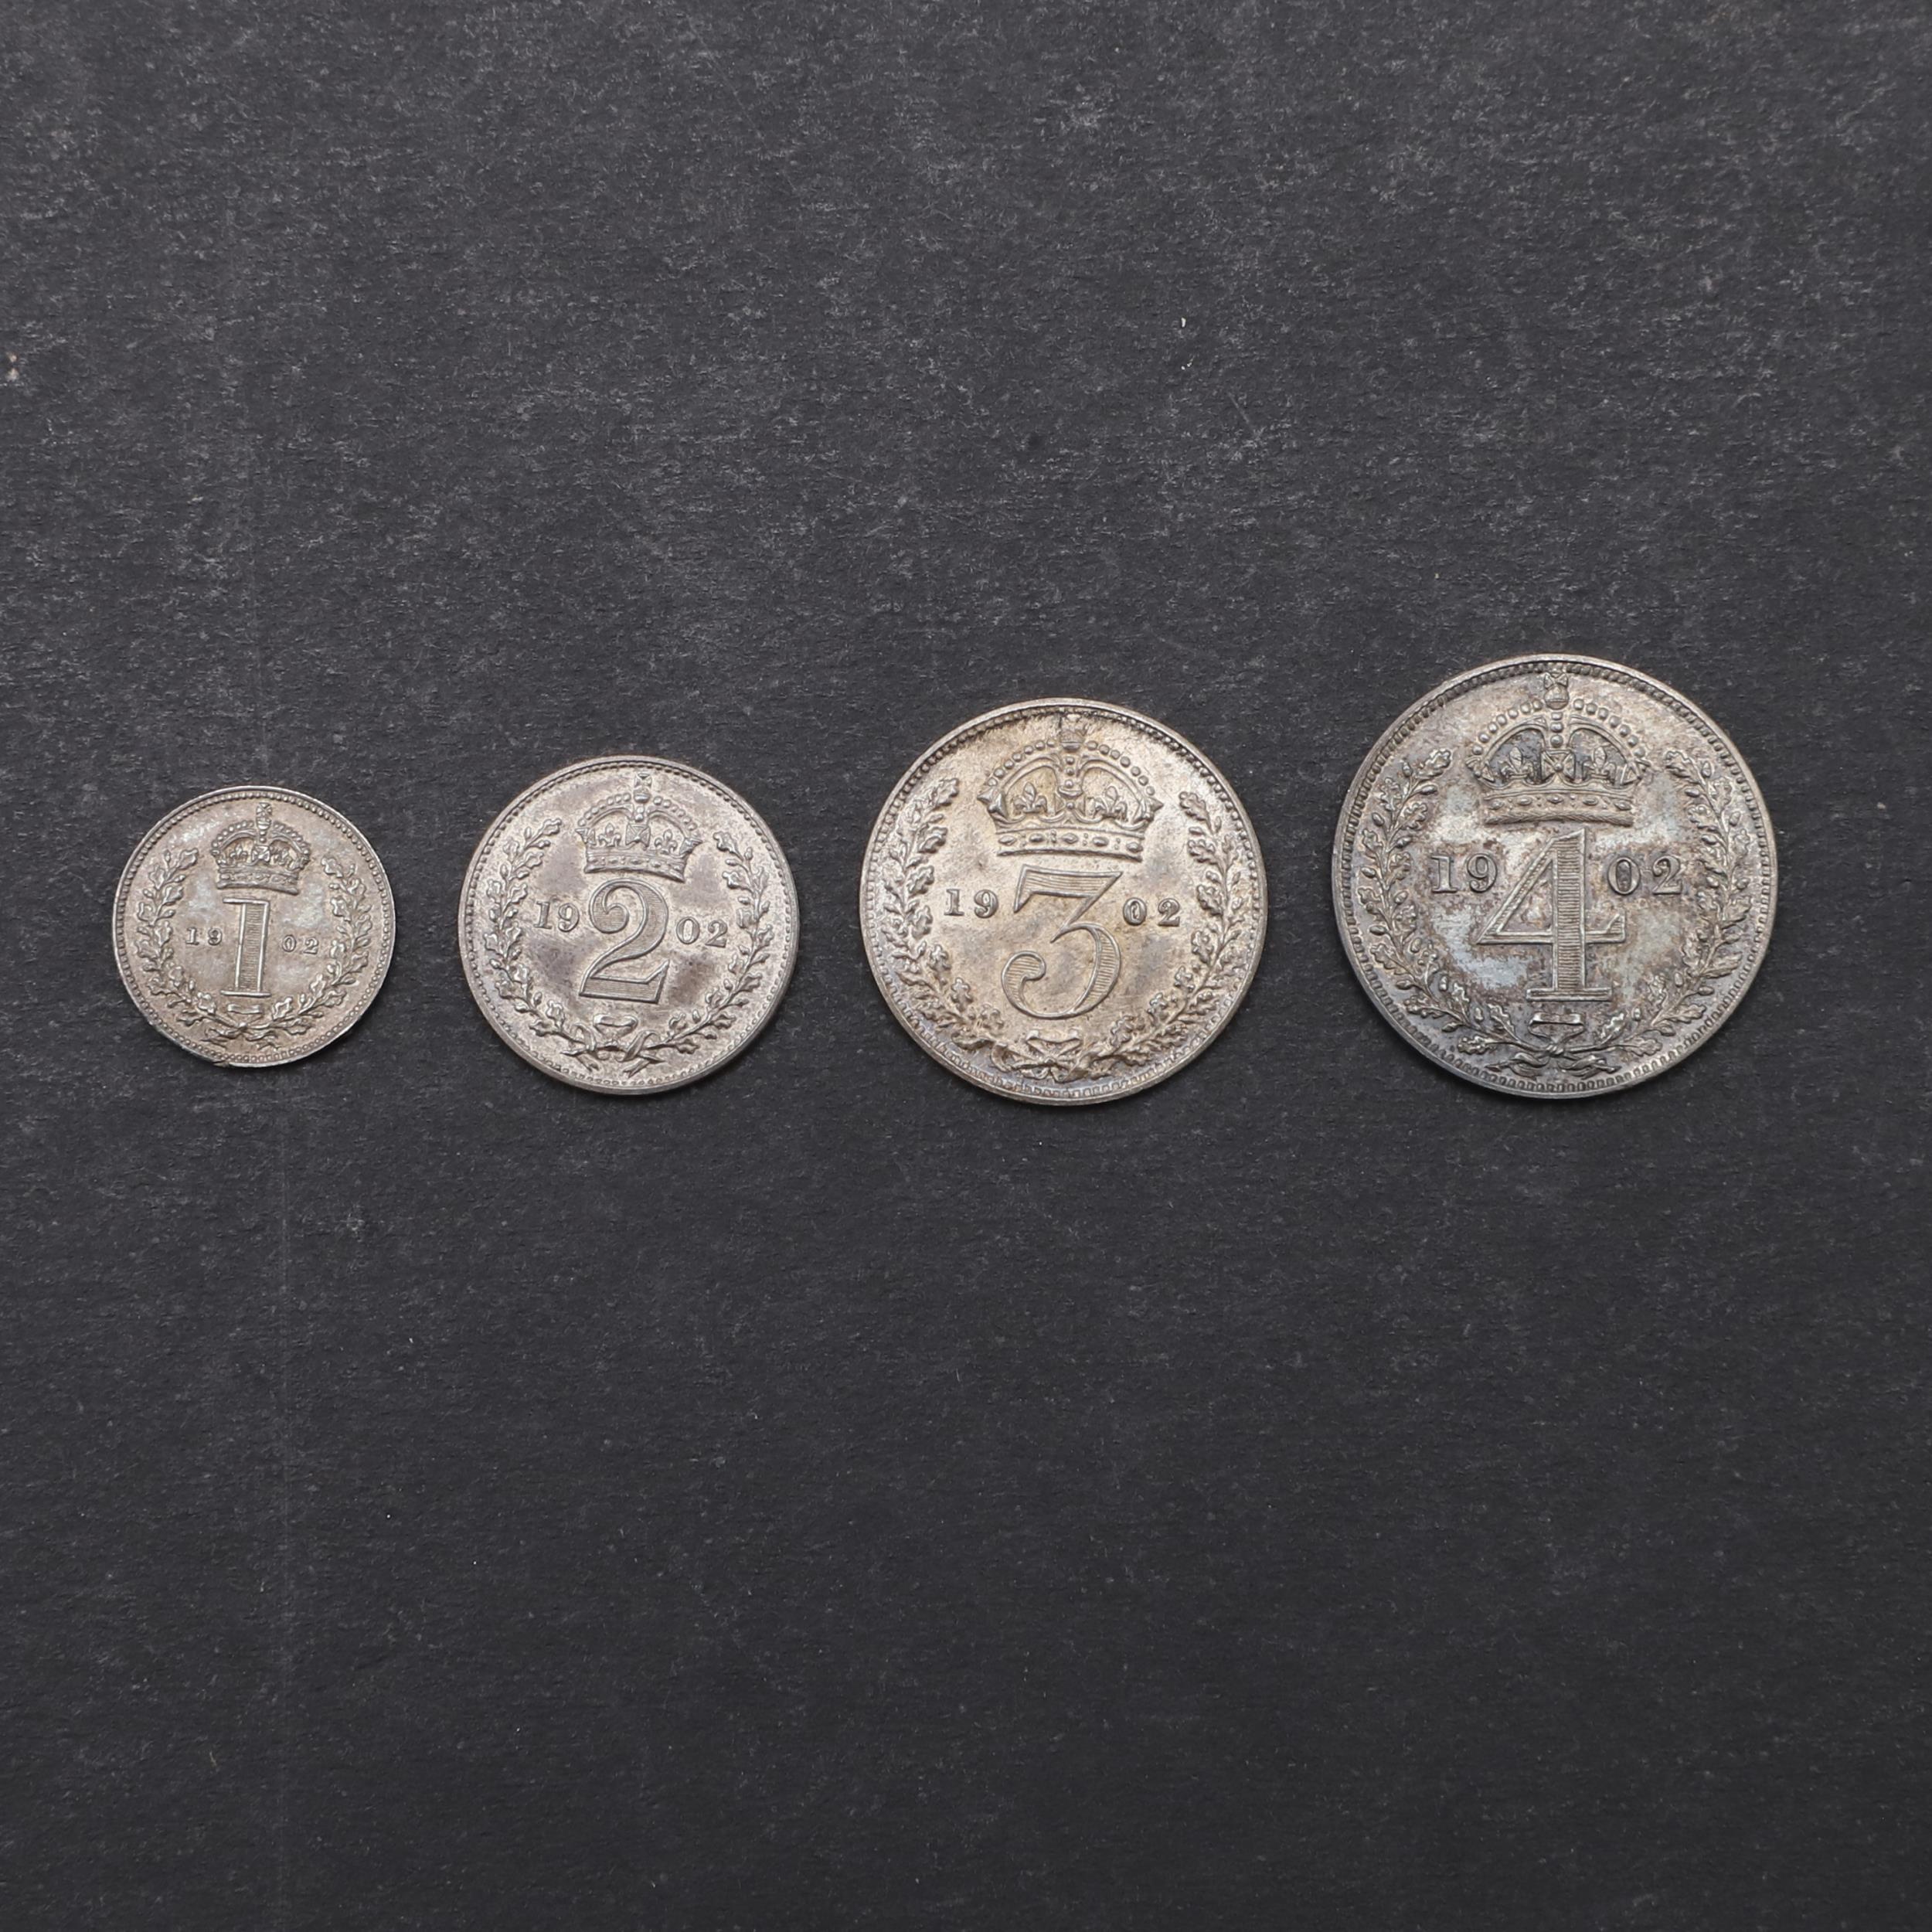 A CASED SET OF EDWARD VII MATT PROOF MAUNDY COINS, 1902. - Image 2 of 5